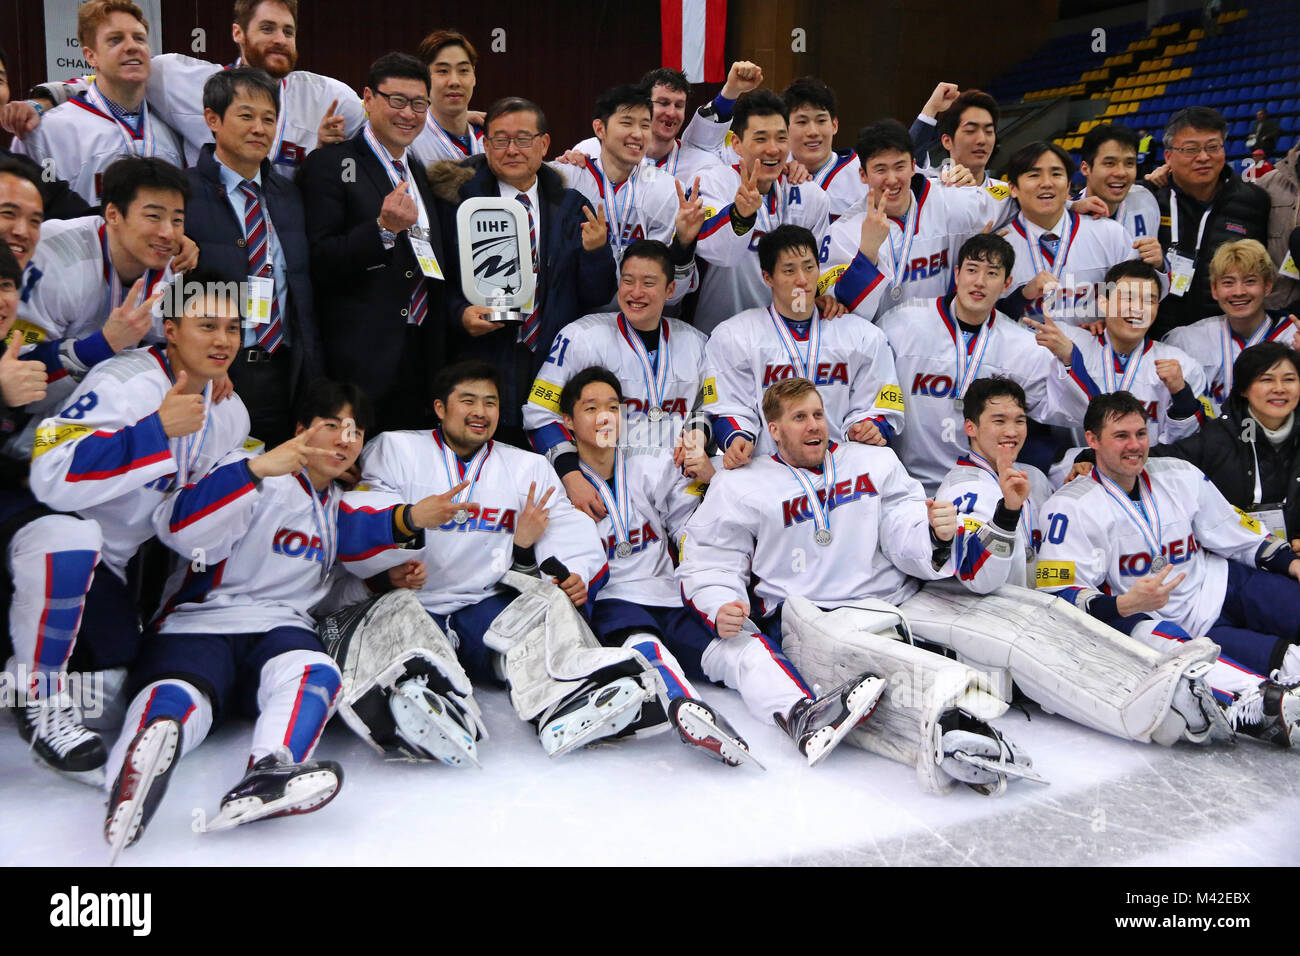 KYIV, UKRAINE - APRIL 28, 2017: Team of South Korea, silver medalist of the IIHF 2017 Ice Hockey World Championship Div 1A, pose for a group photo at  Stock Photo